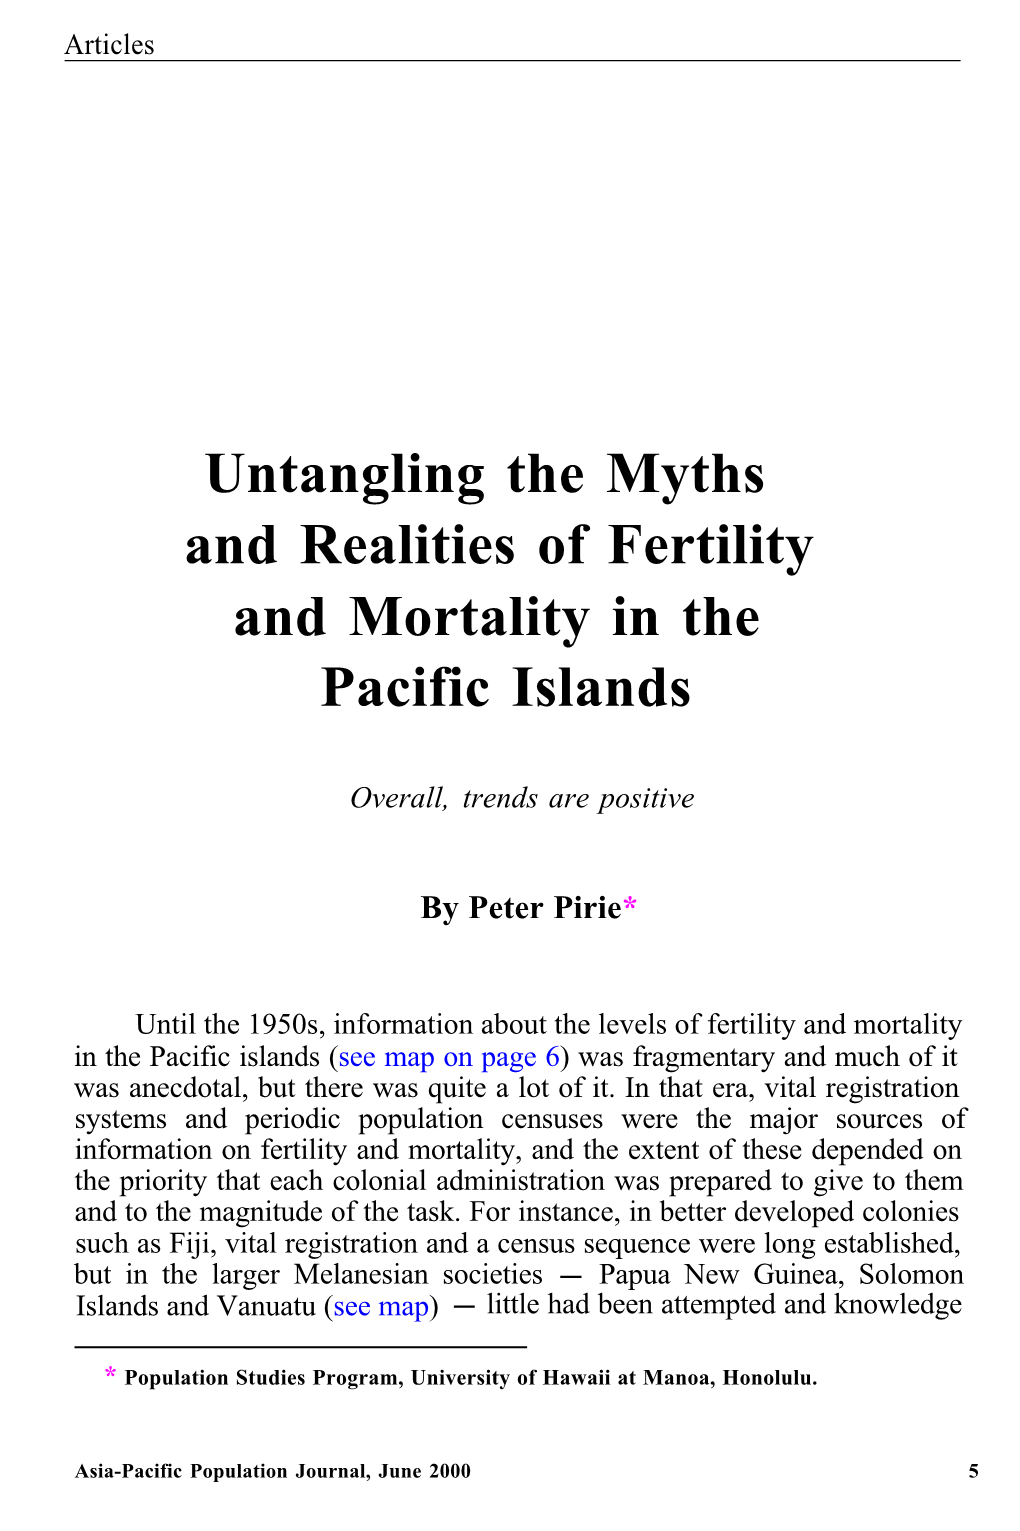 Untangling the Myths and Realities of Fertility and Mortality in the Pacific Islands